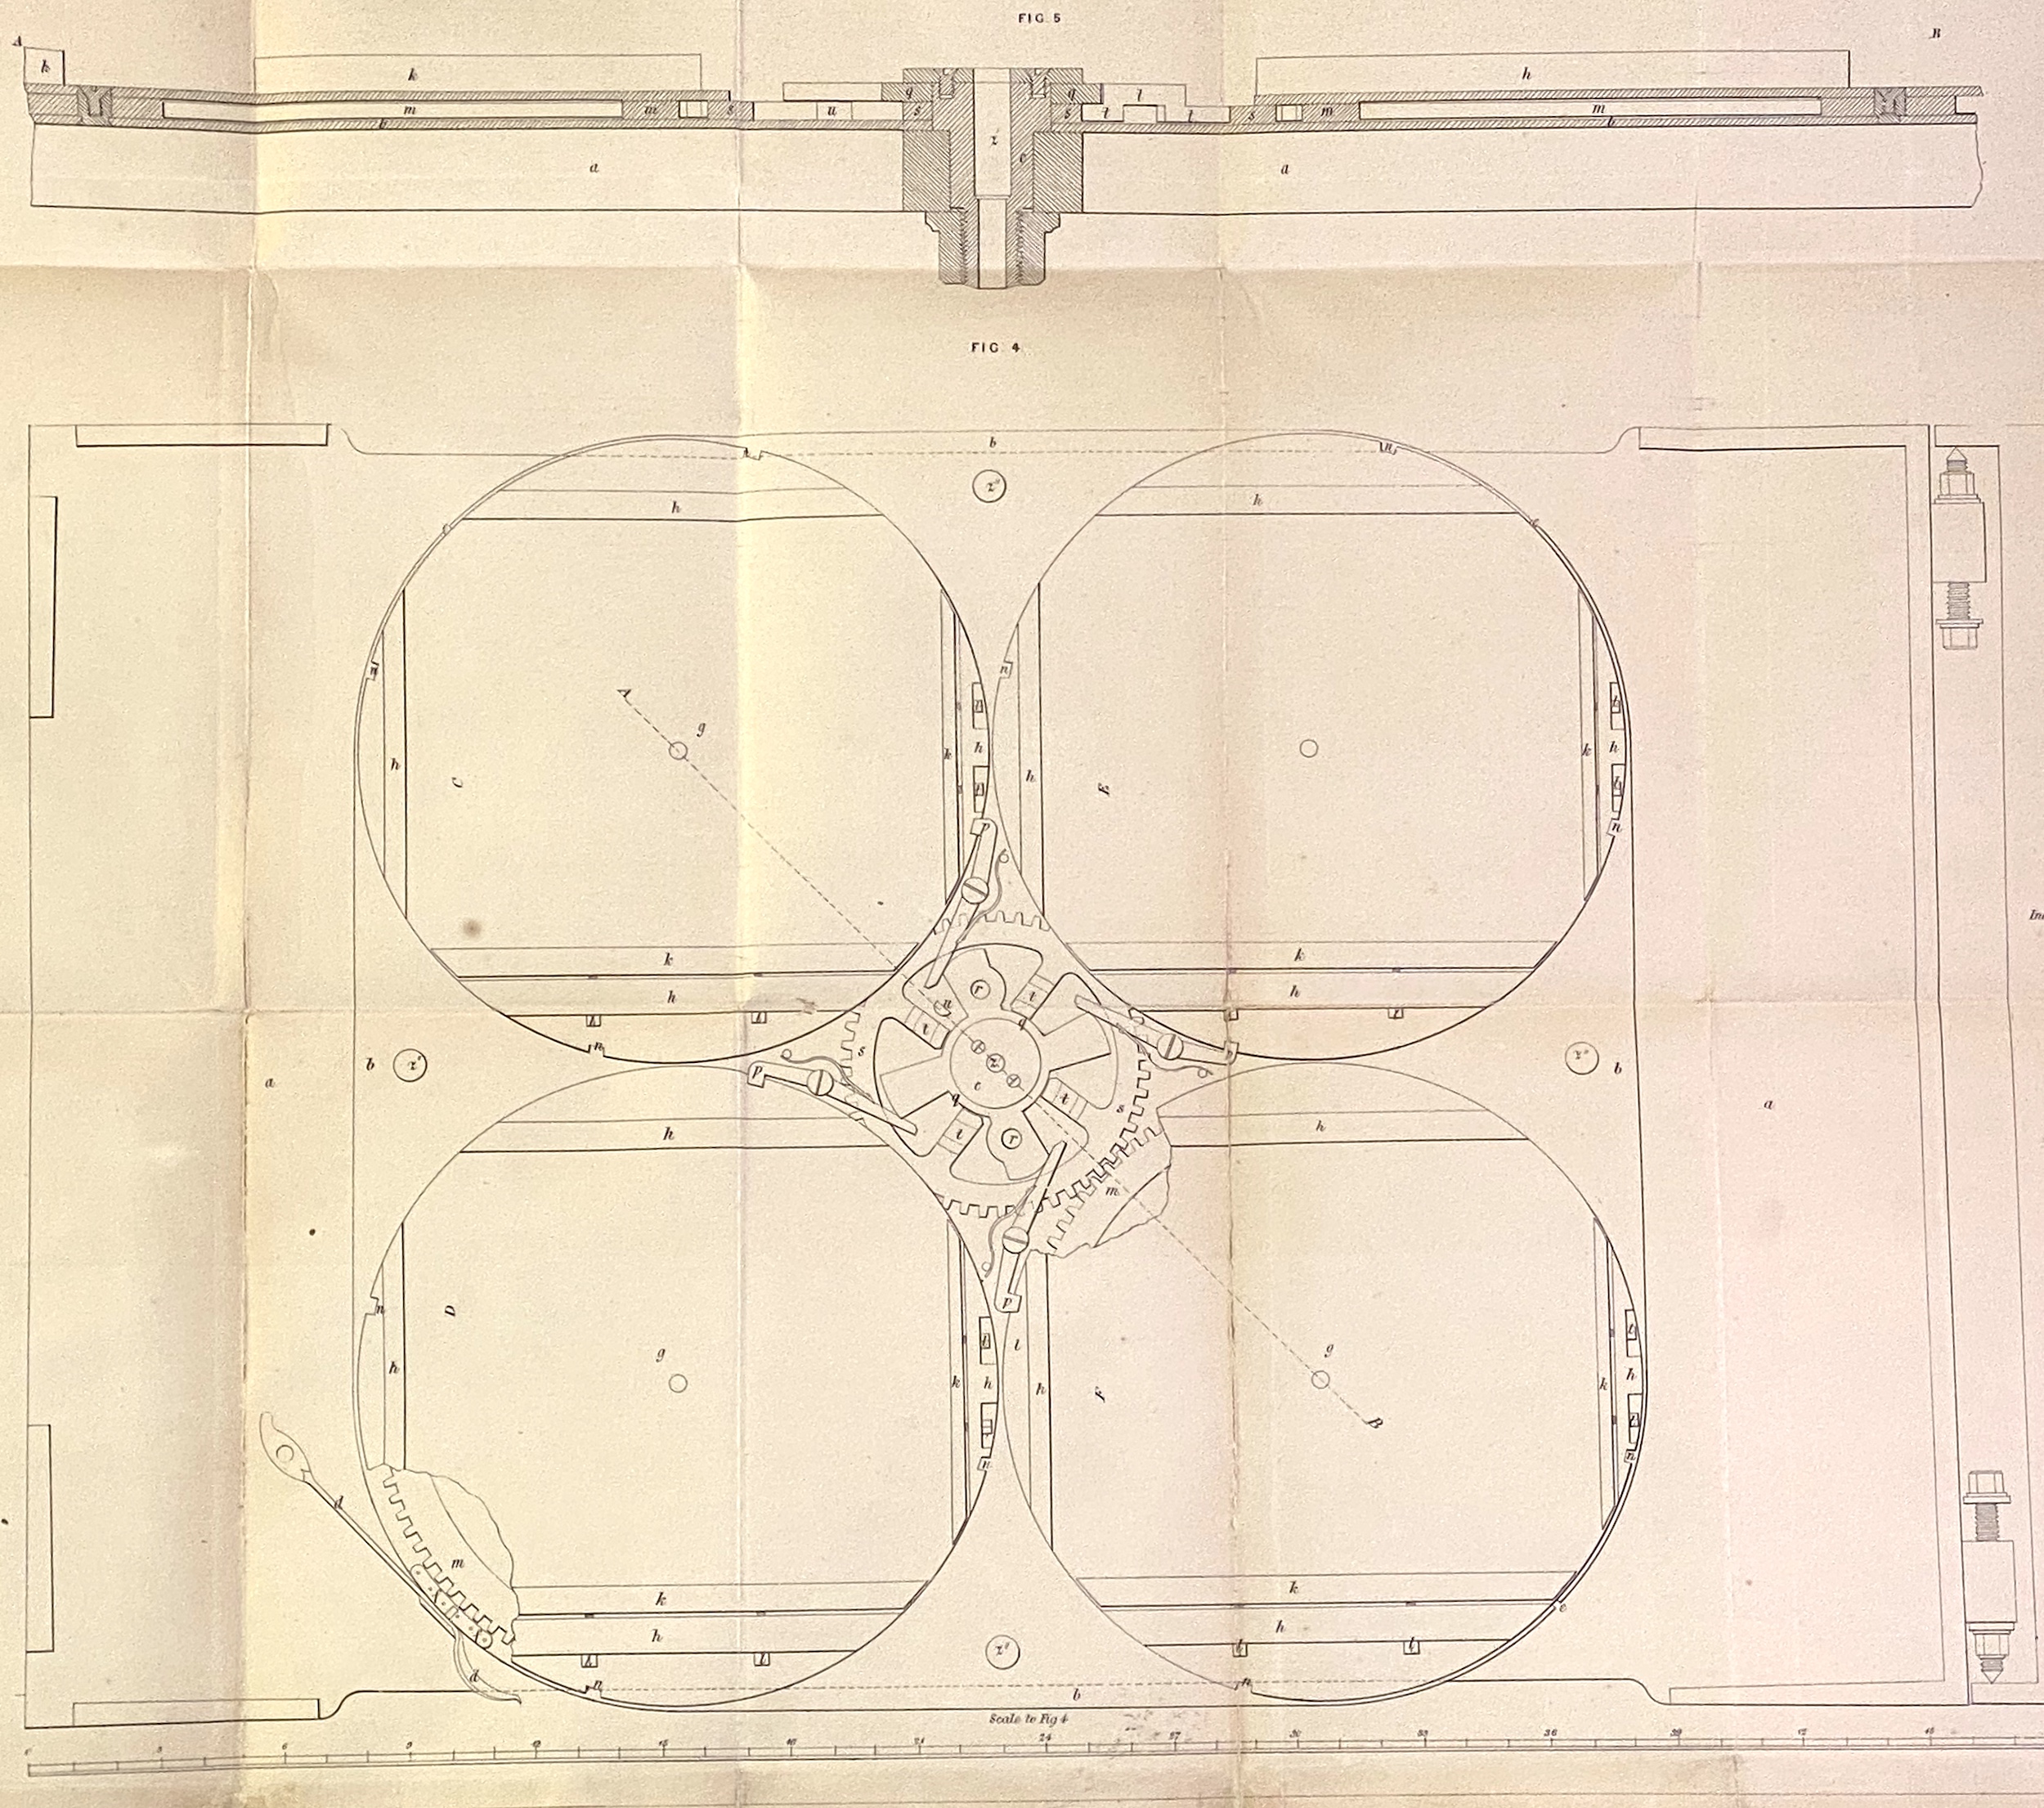 Knight's second patent drawing for his color printing patent.